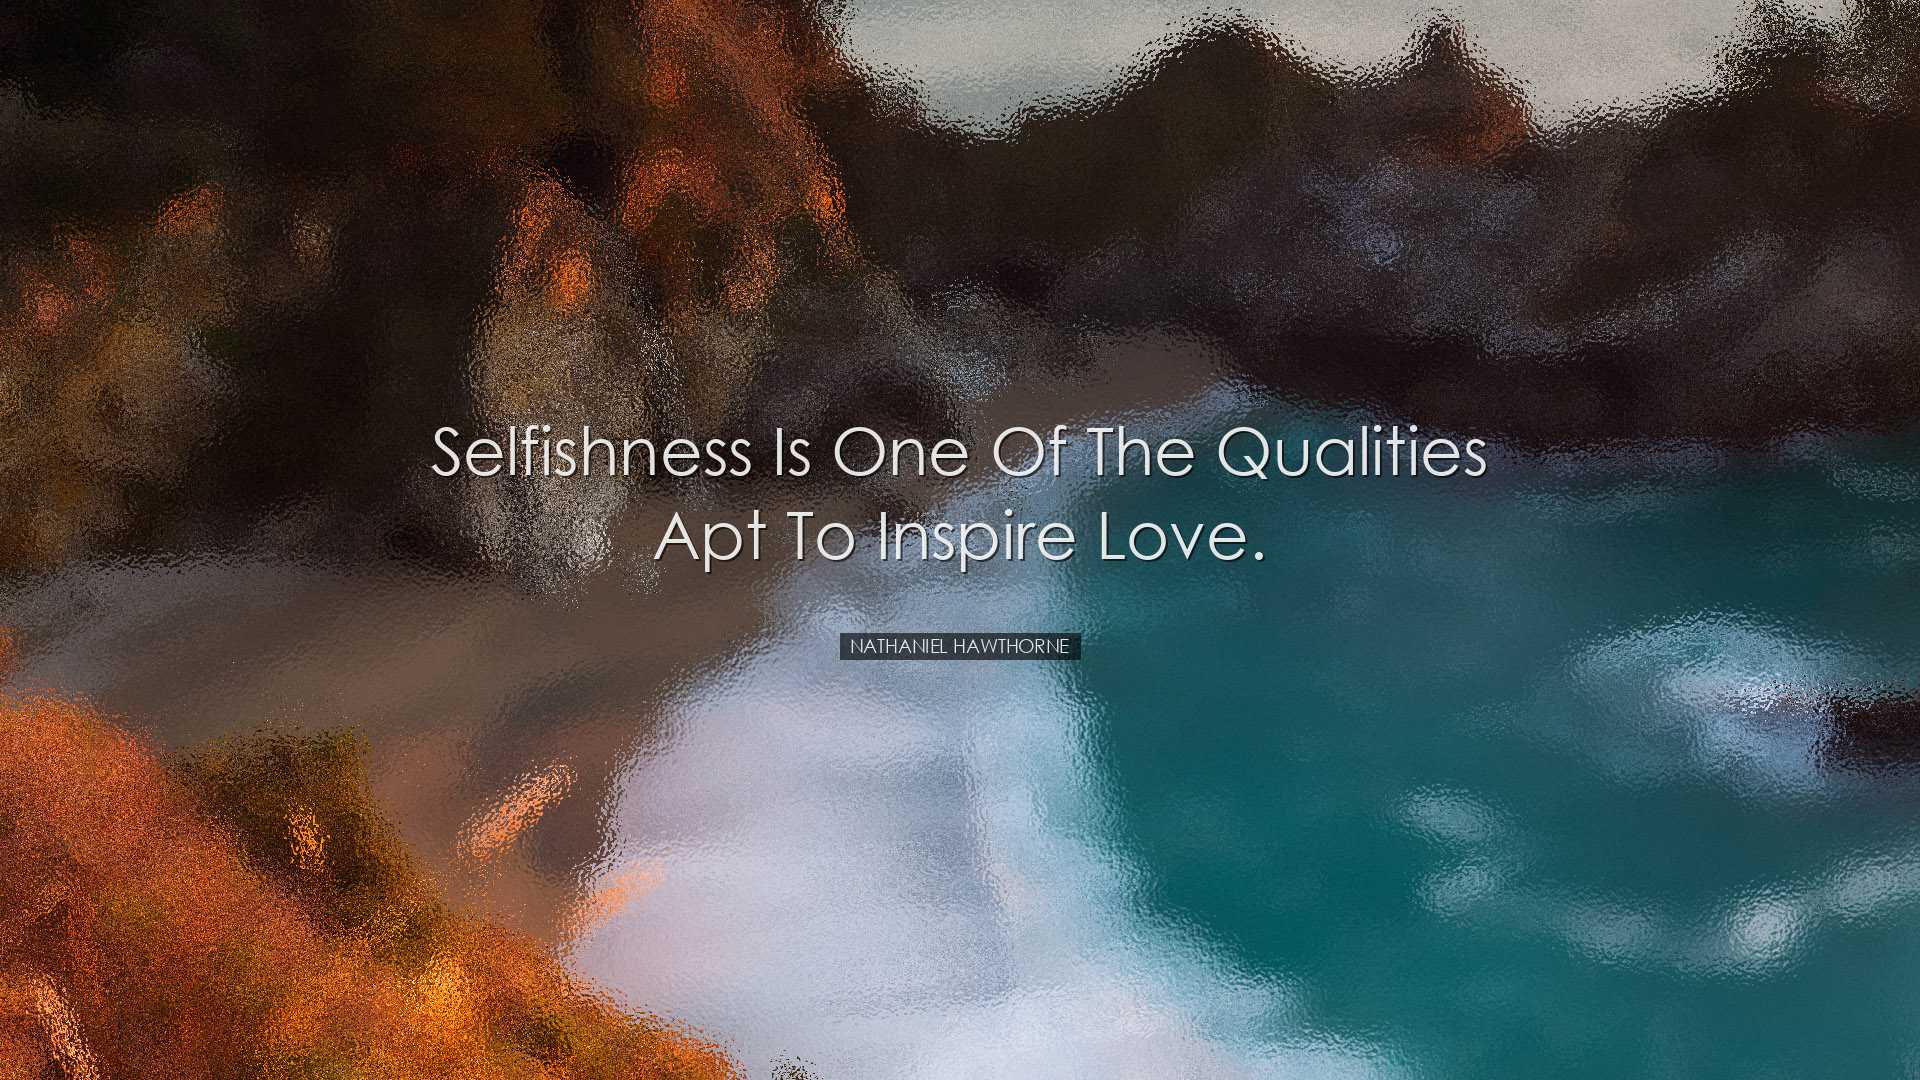 Selfishness is one of the qualities apt to inspire love. - Nathani